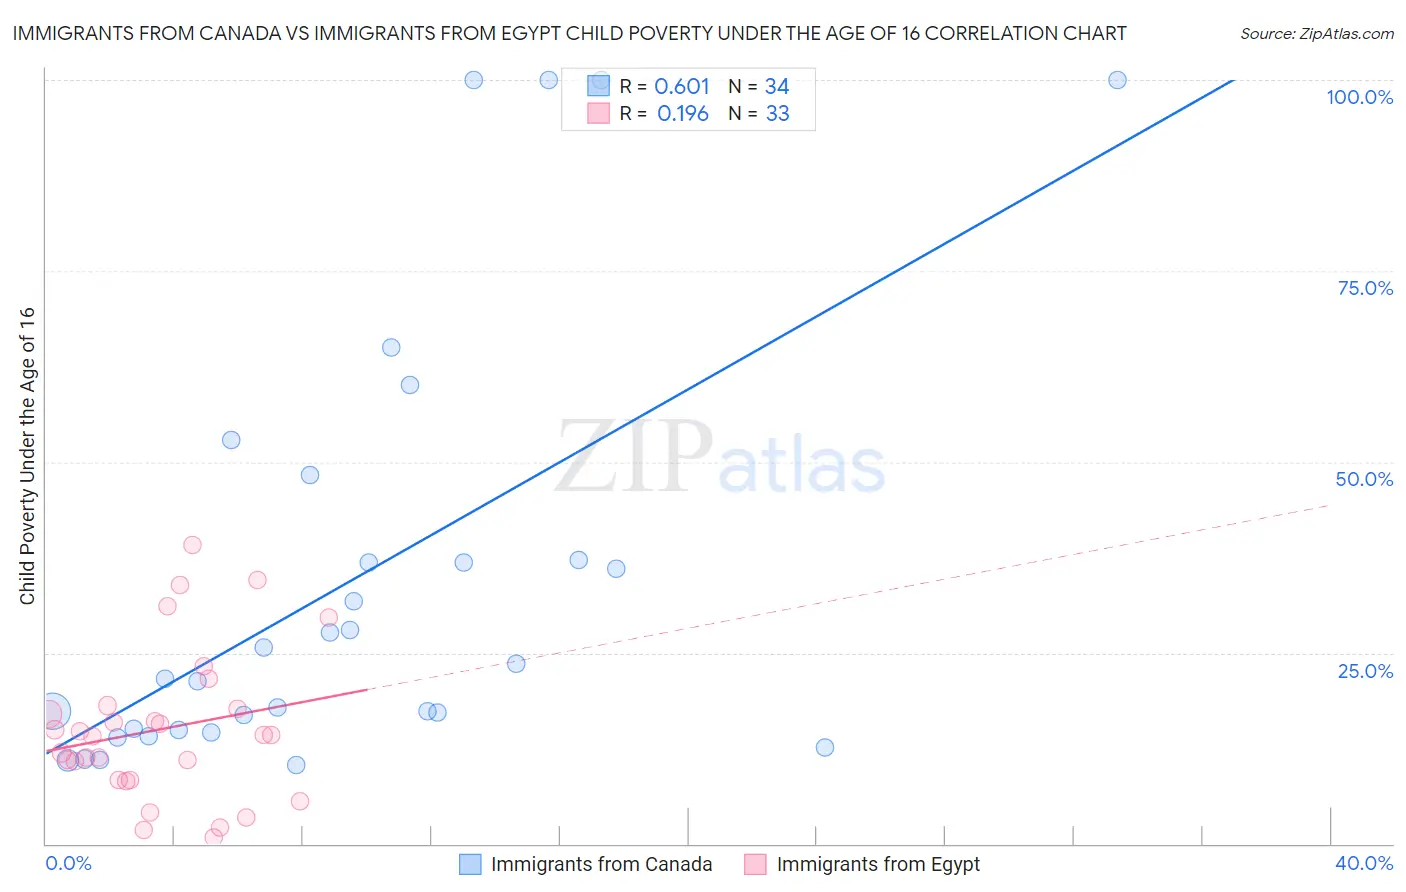 Immigrants from Canada vs Immigrants from Egypt Child Poverty Under the Age of 16